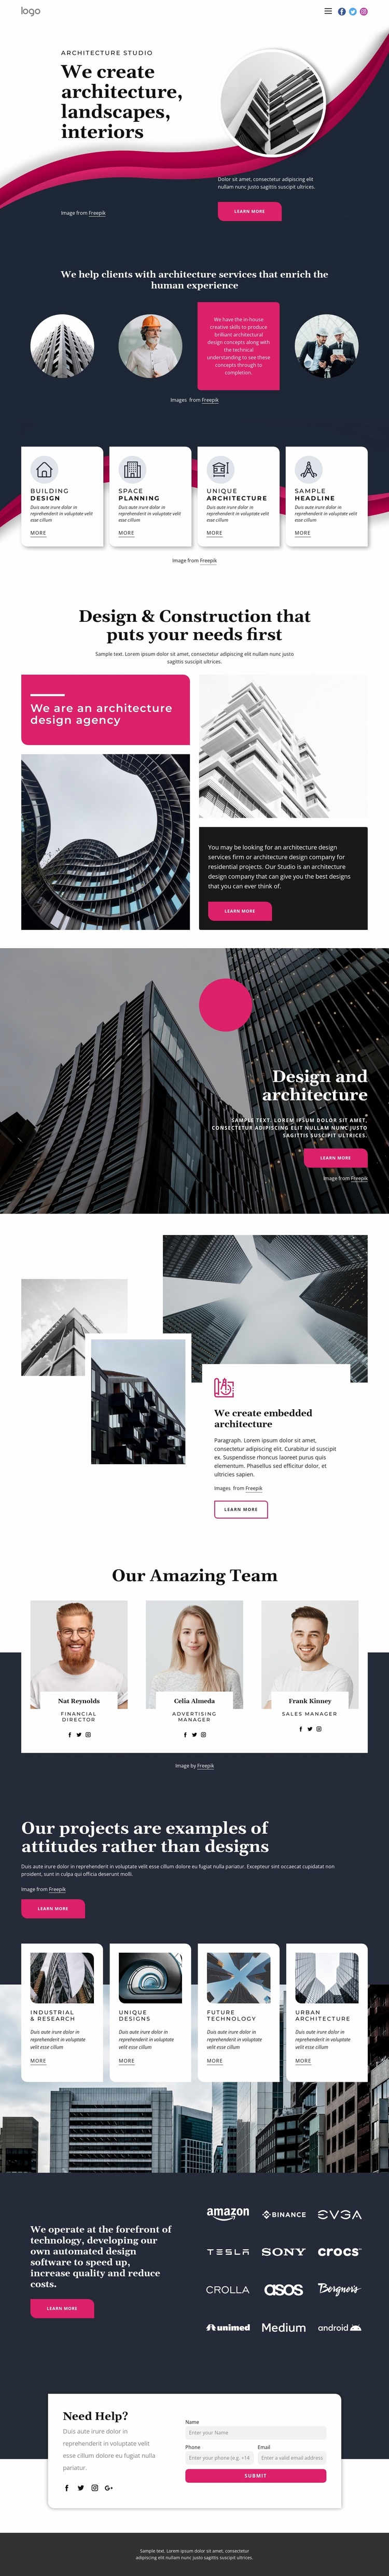 We create great architecture Website Template